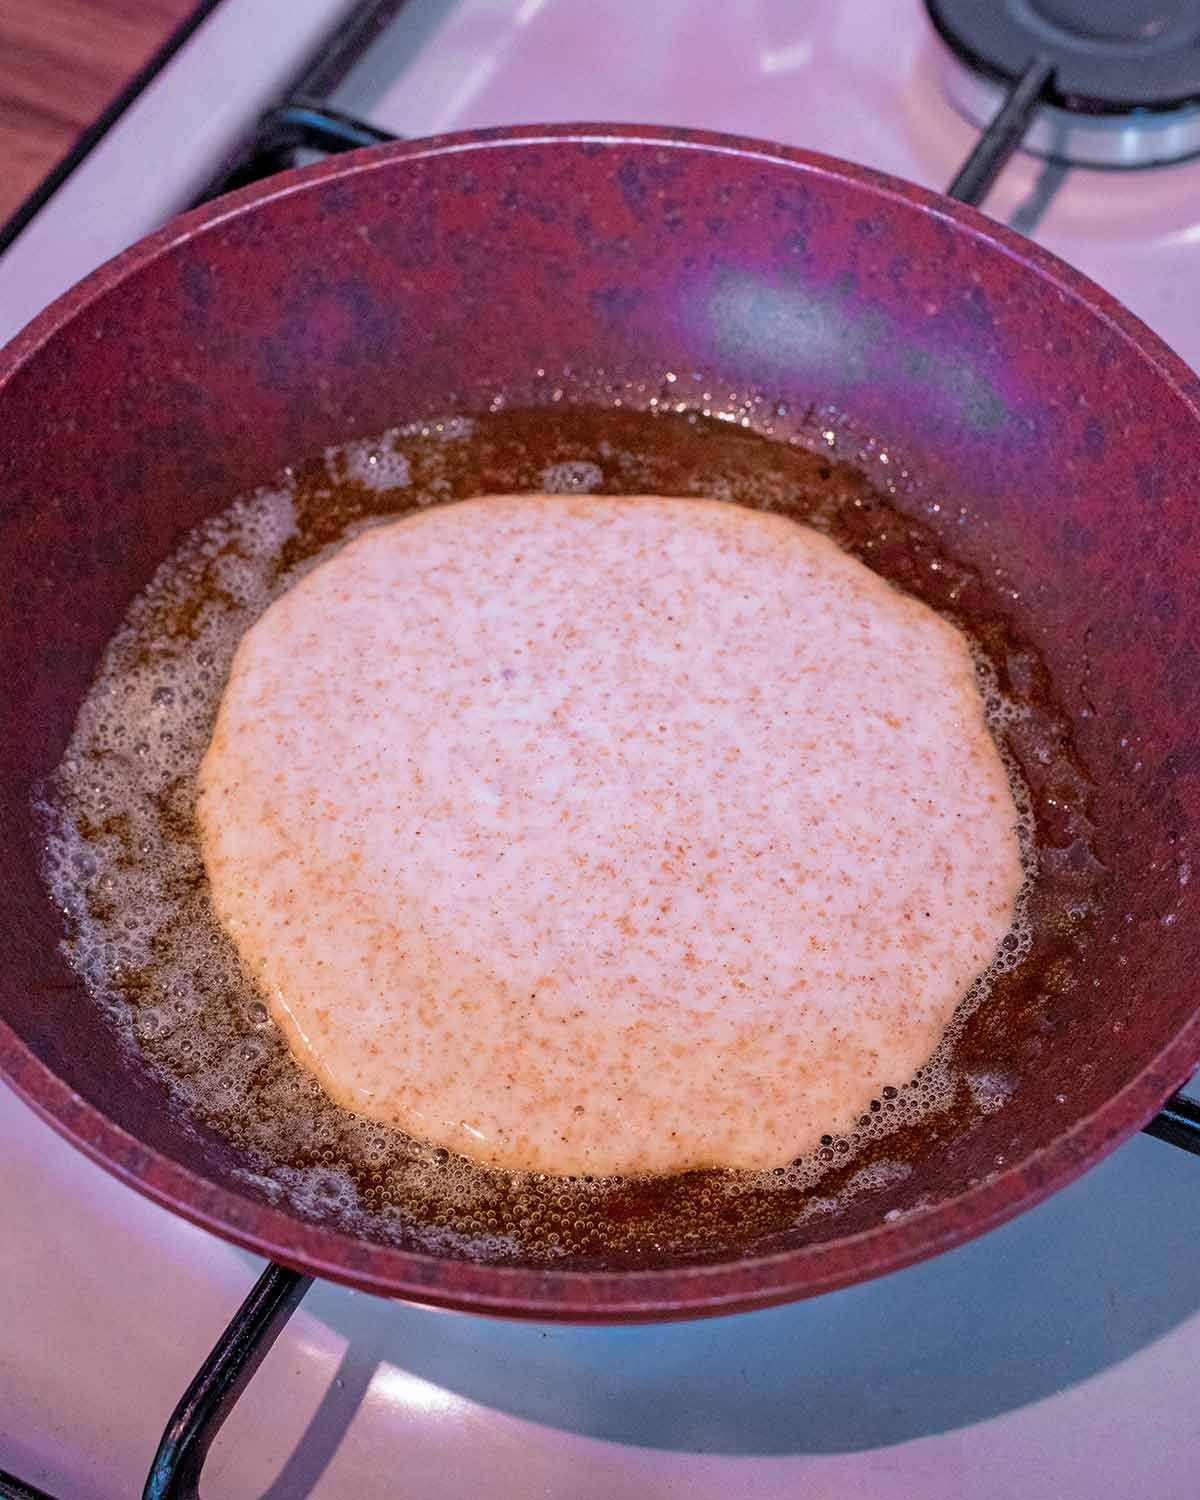 A frying pan with a pancake cooking in it.